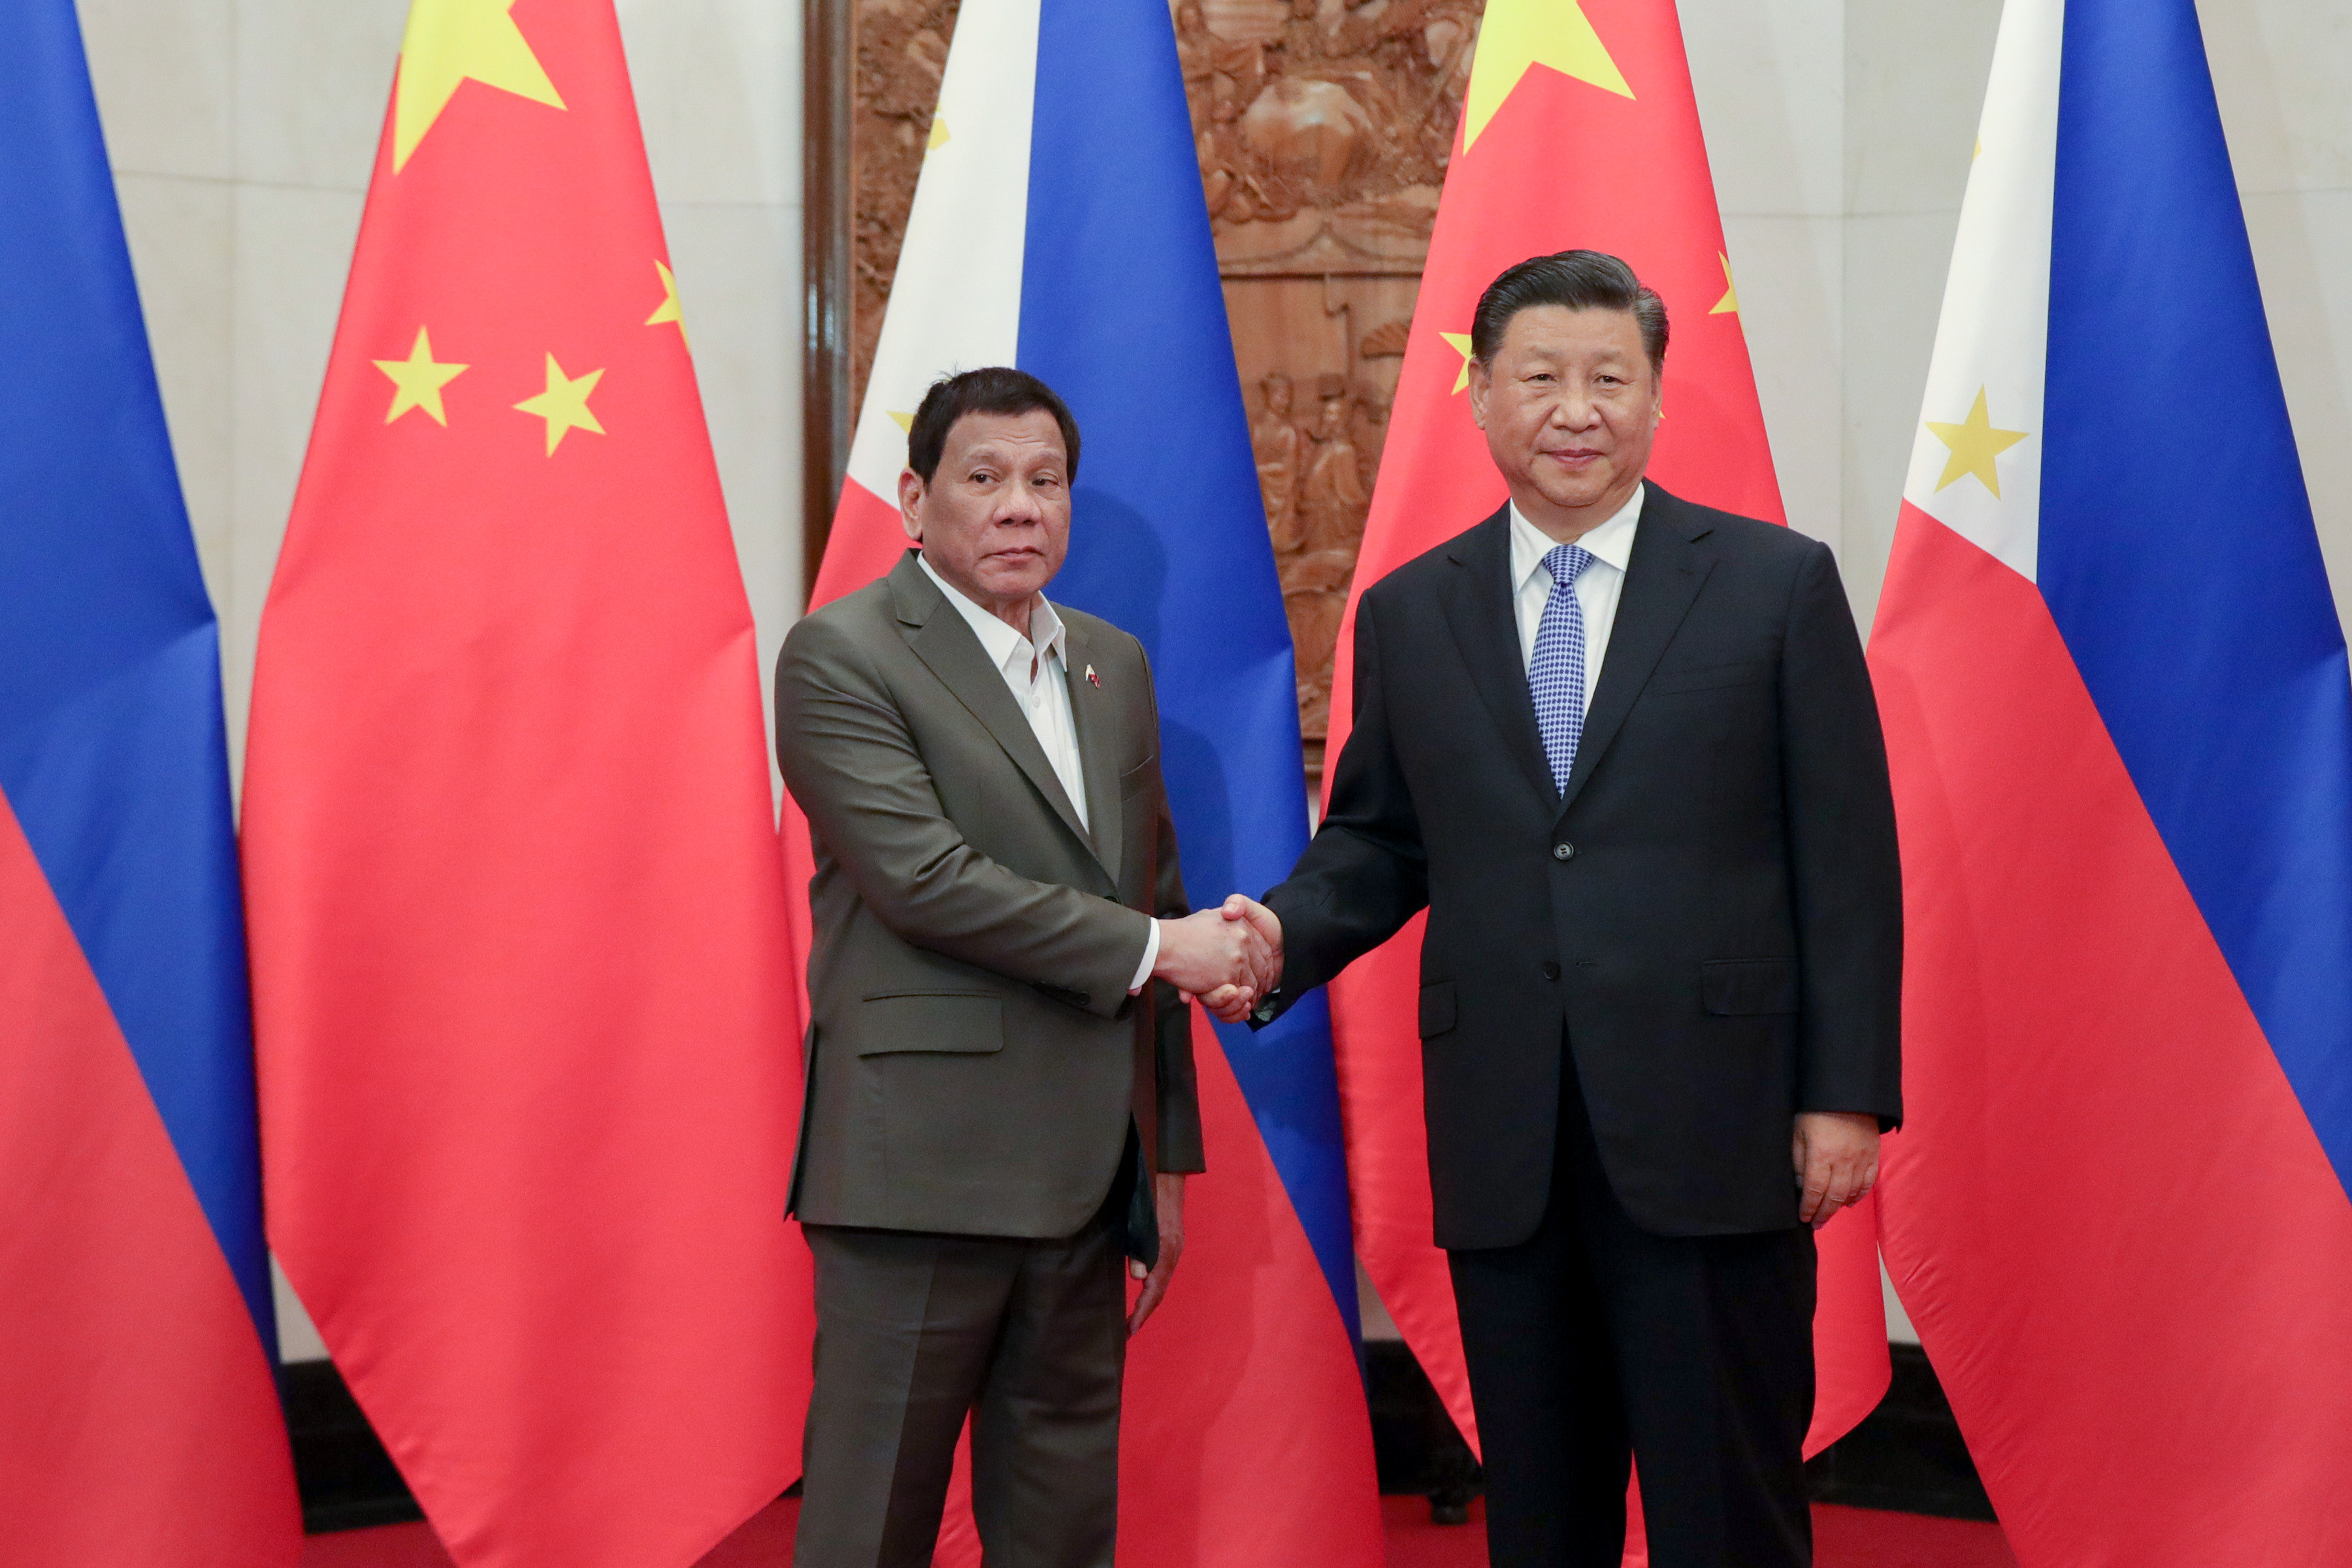 PRRD at the Bilateral Meeting with People's Republic of China President Xi Jinping